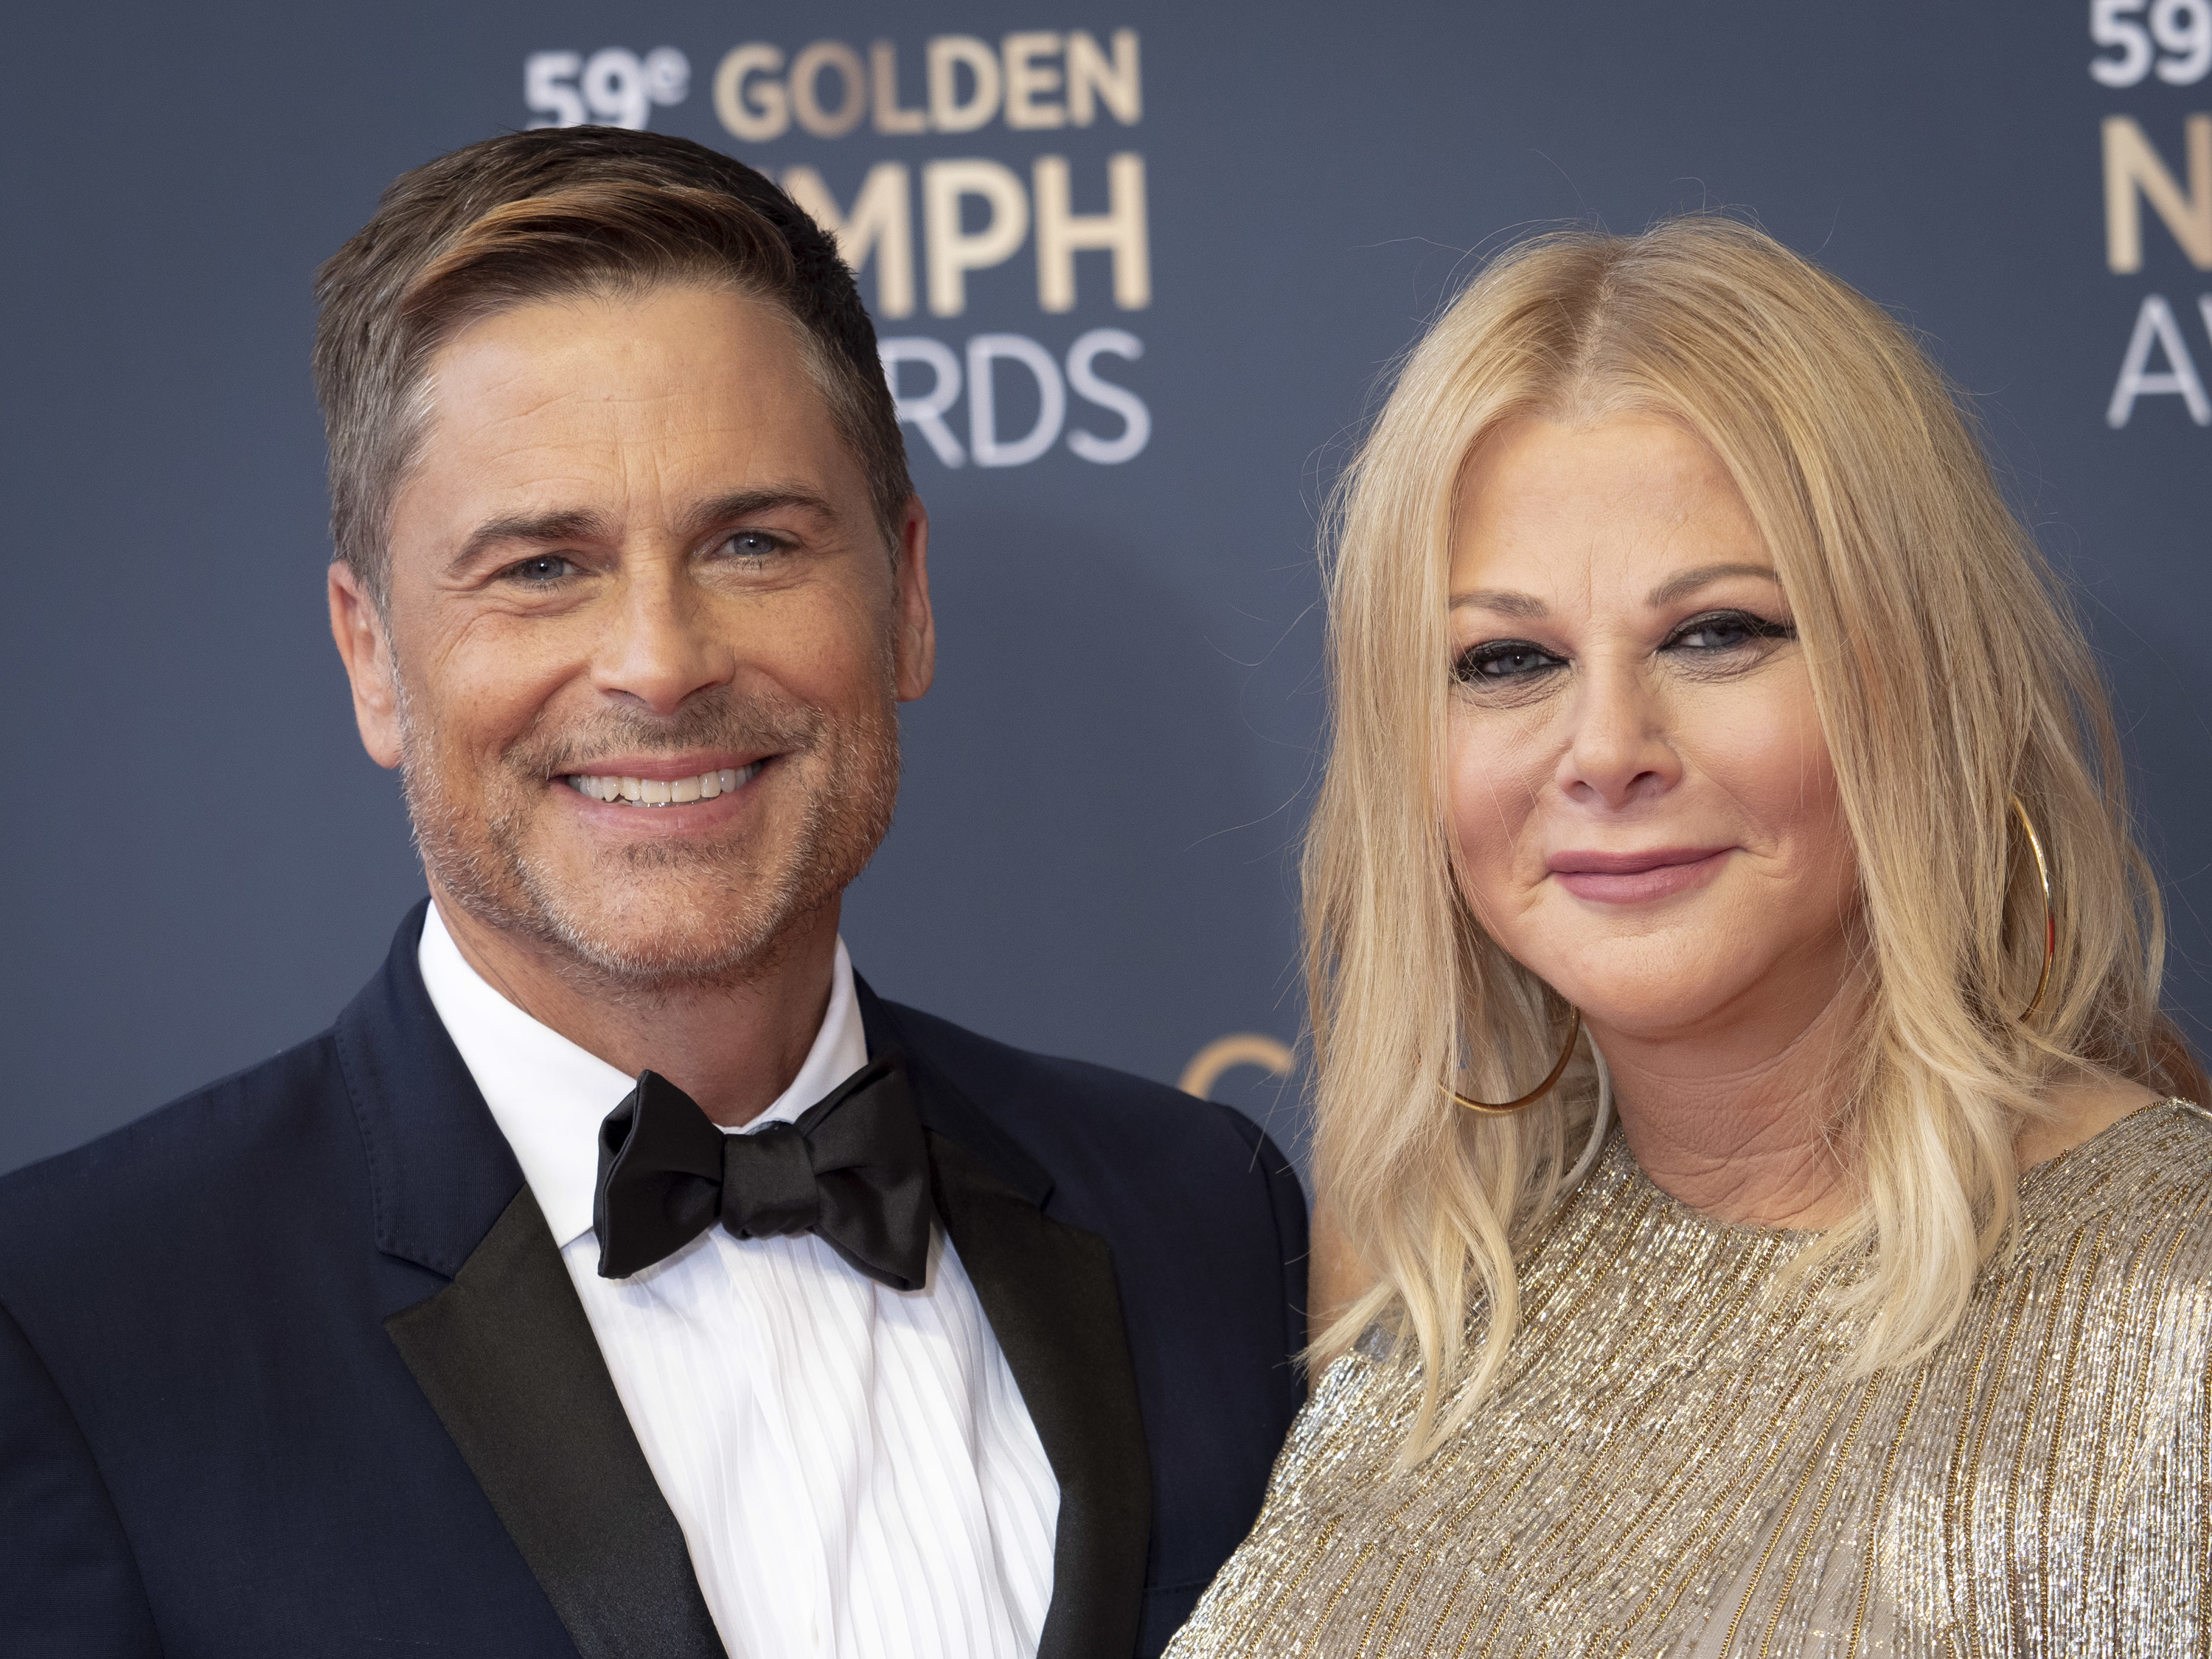 Rob Lowe and Sheryl Berkoff on the red carpet